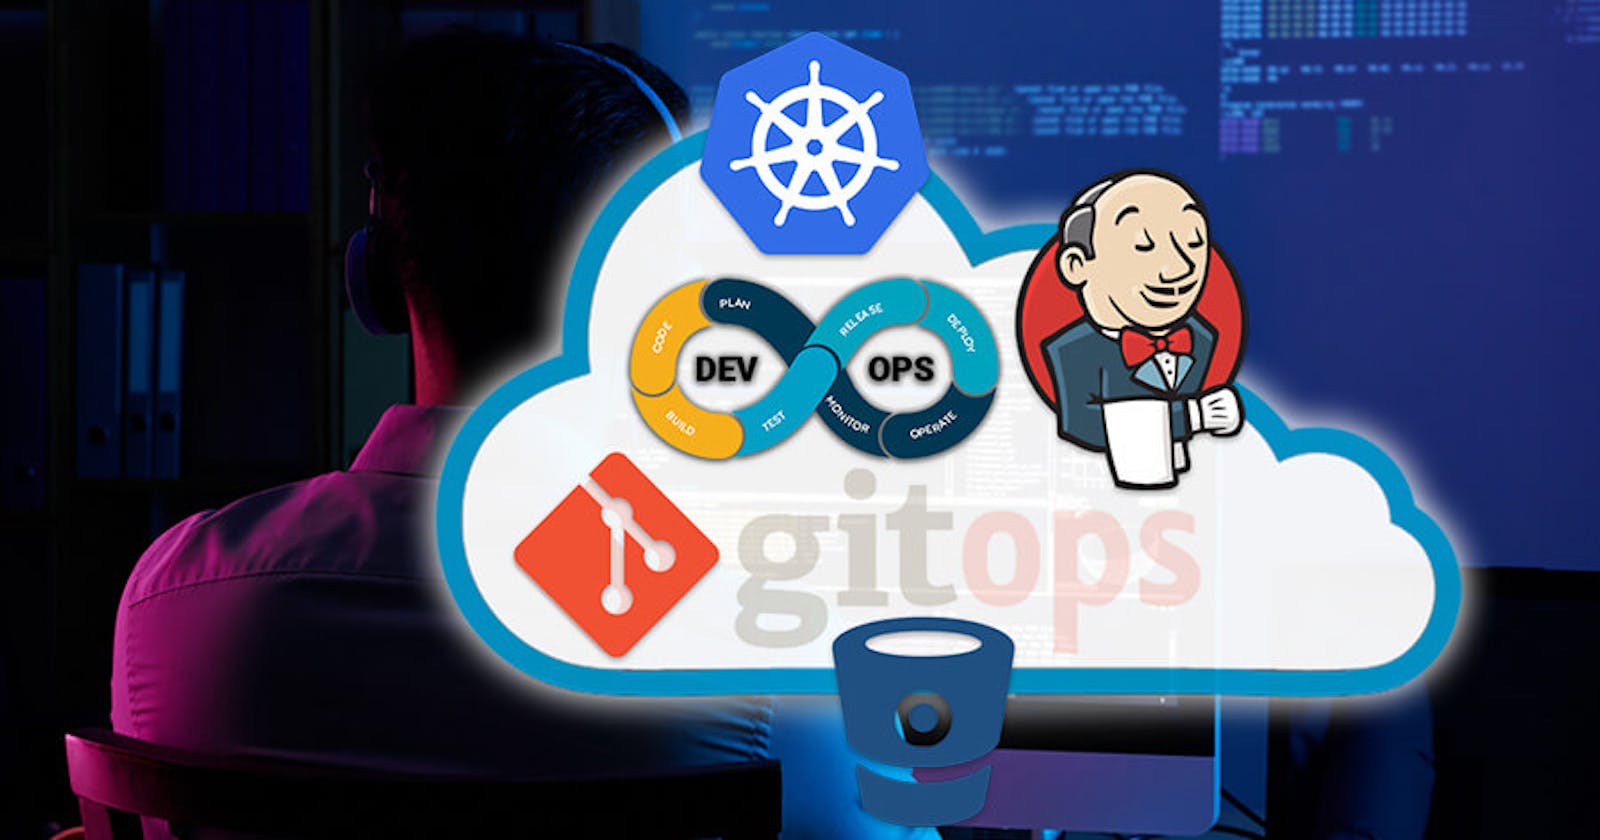 What is GitOps